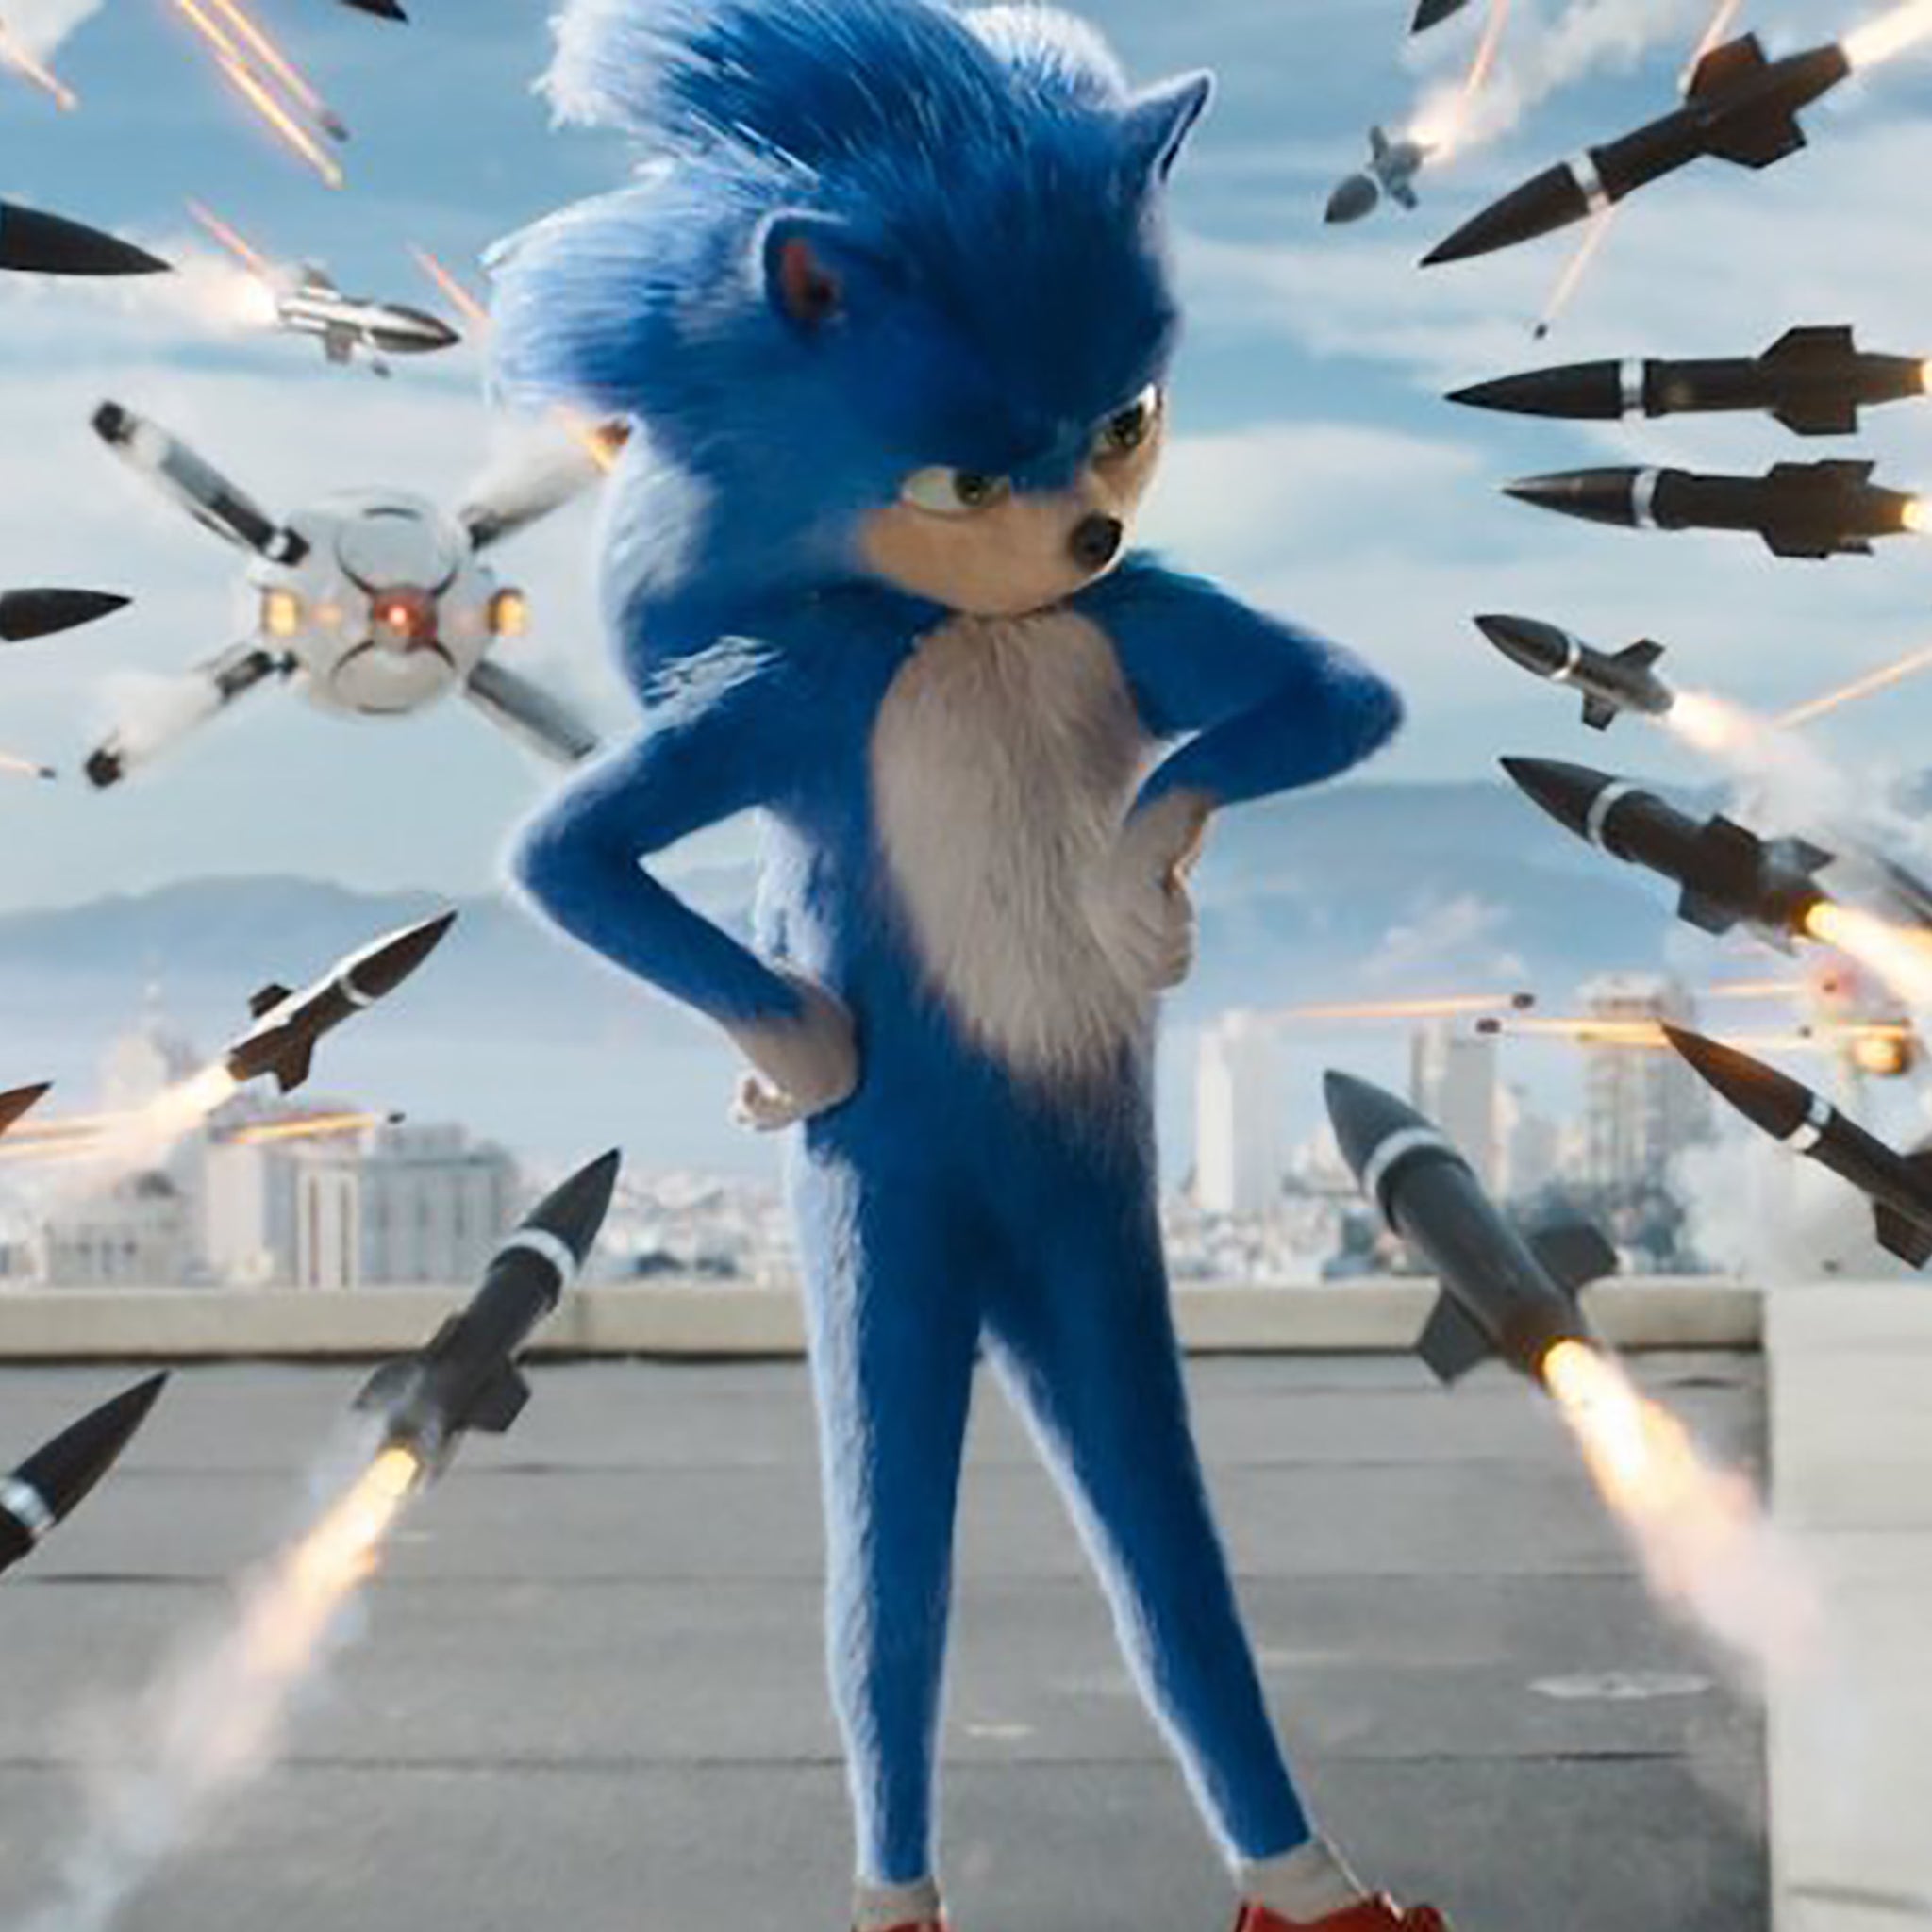 Sonic The Hedgehog 2 2022 405m Ww Out Now On Vod Entertainment Atrl